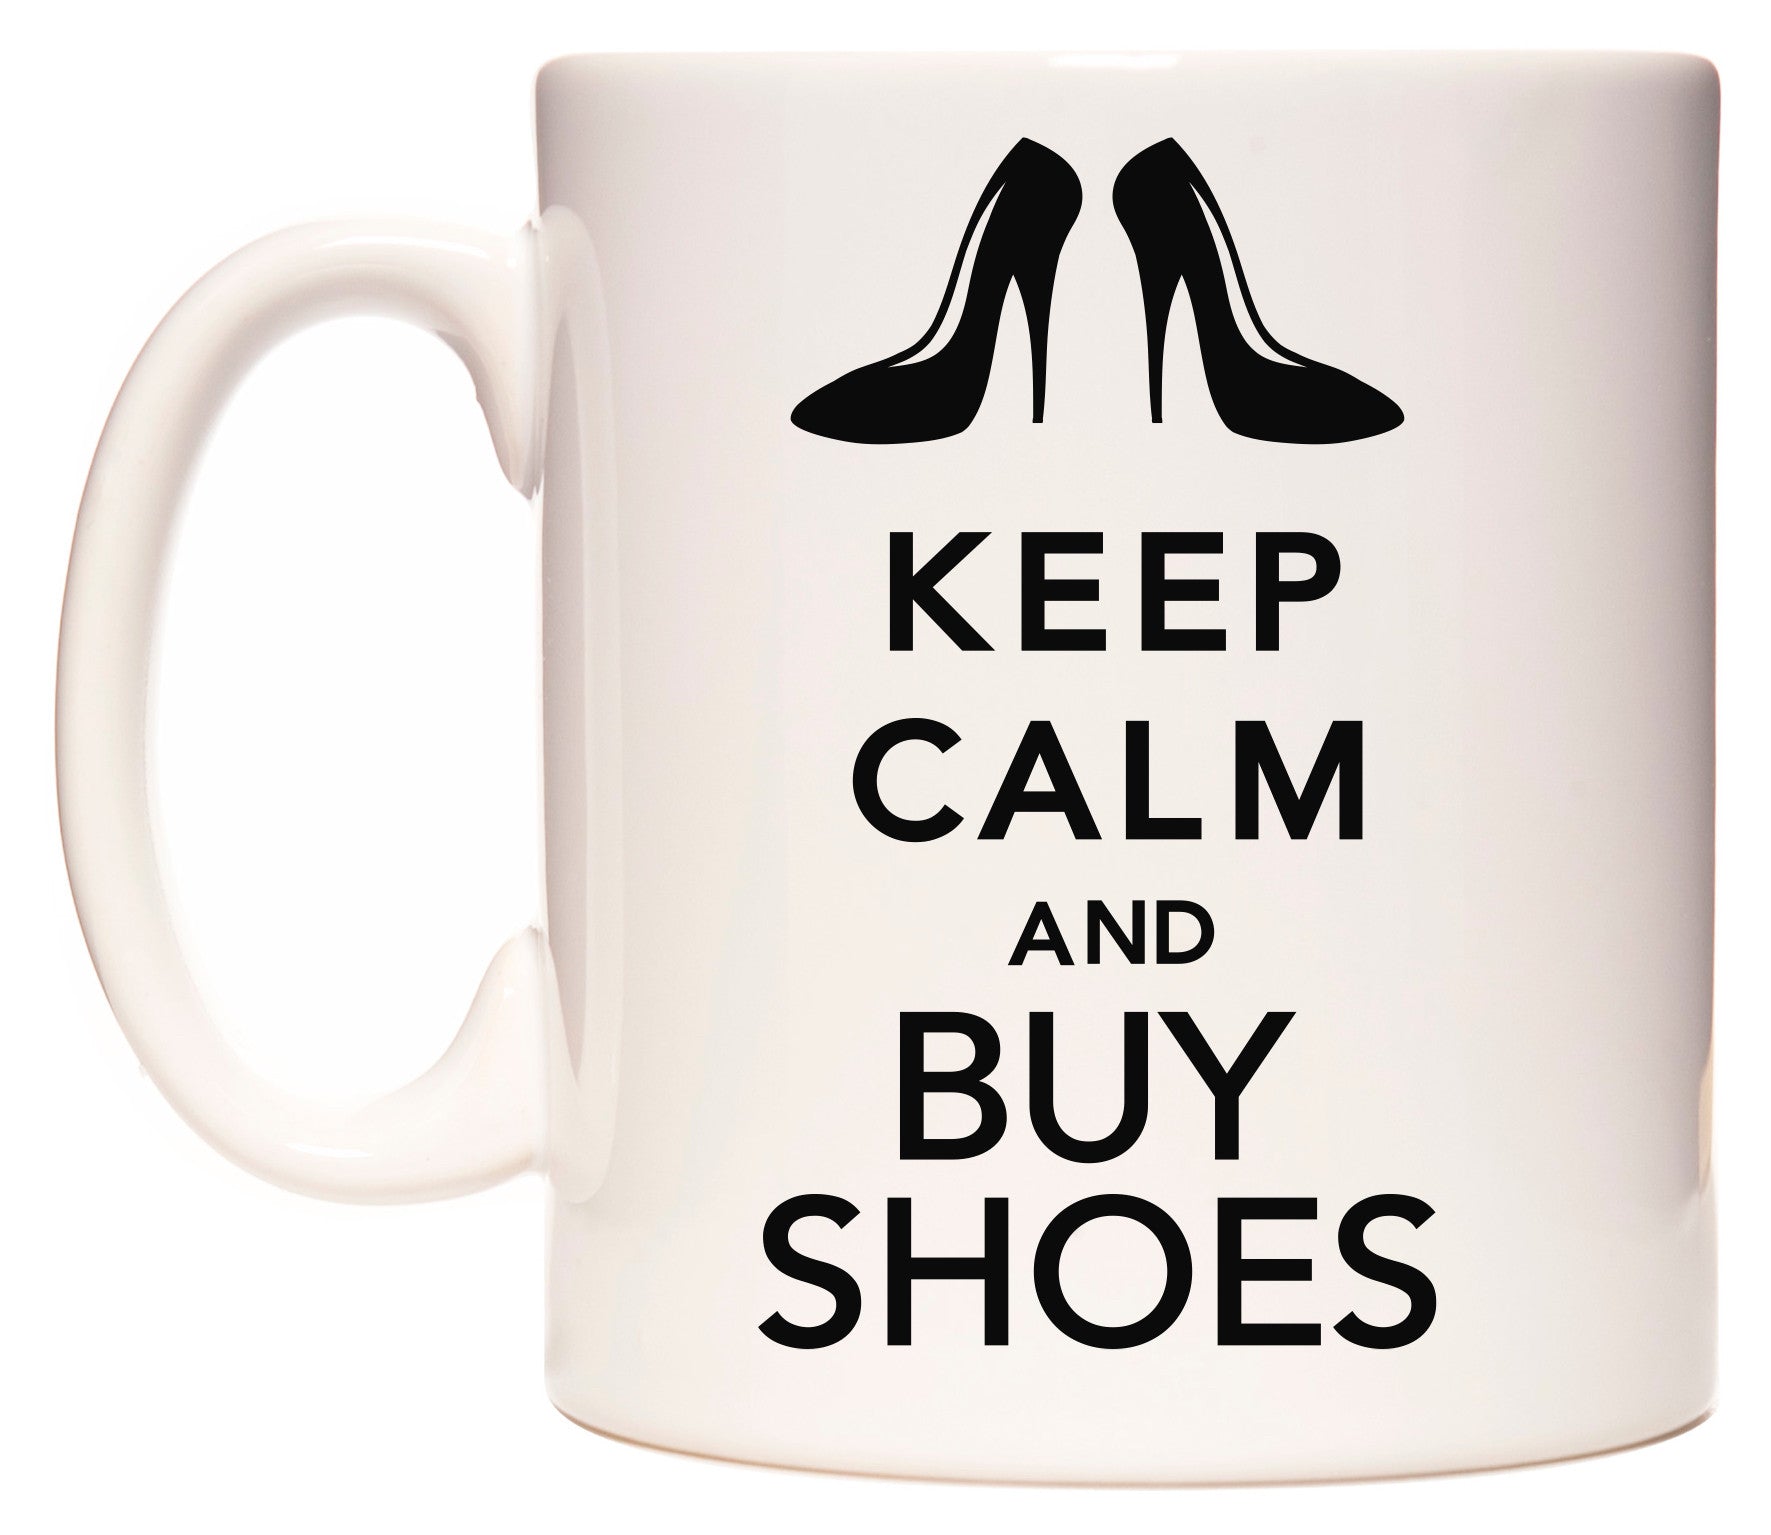 This mug features KEEP CALM AND BUY SHOES